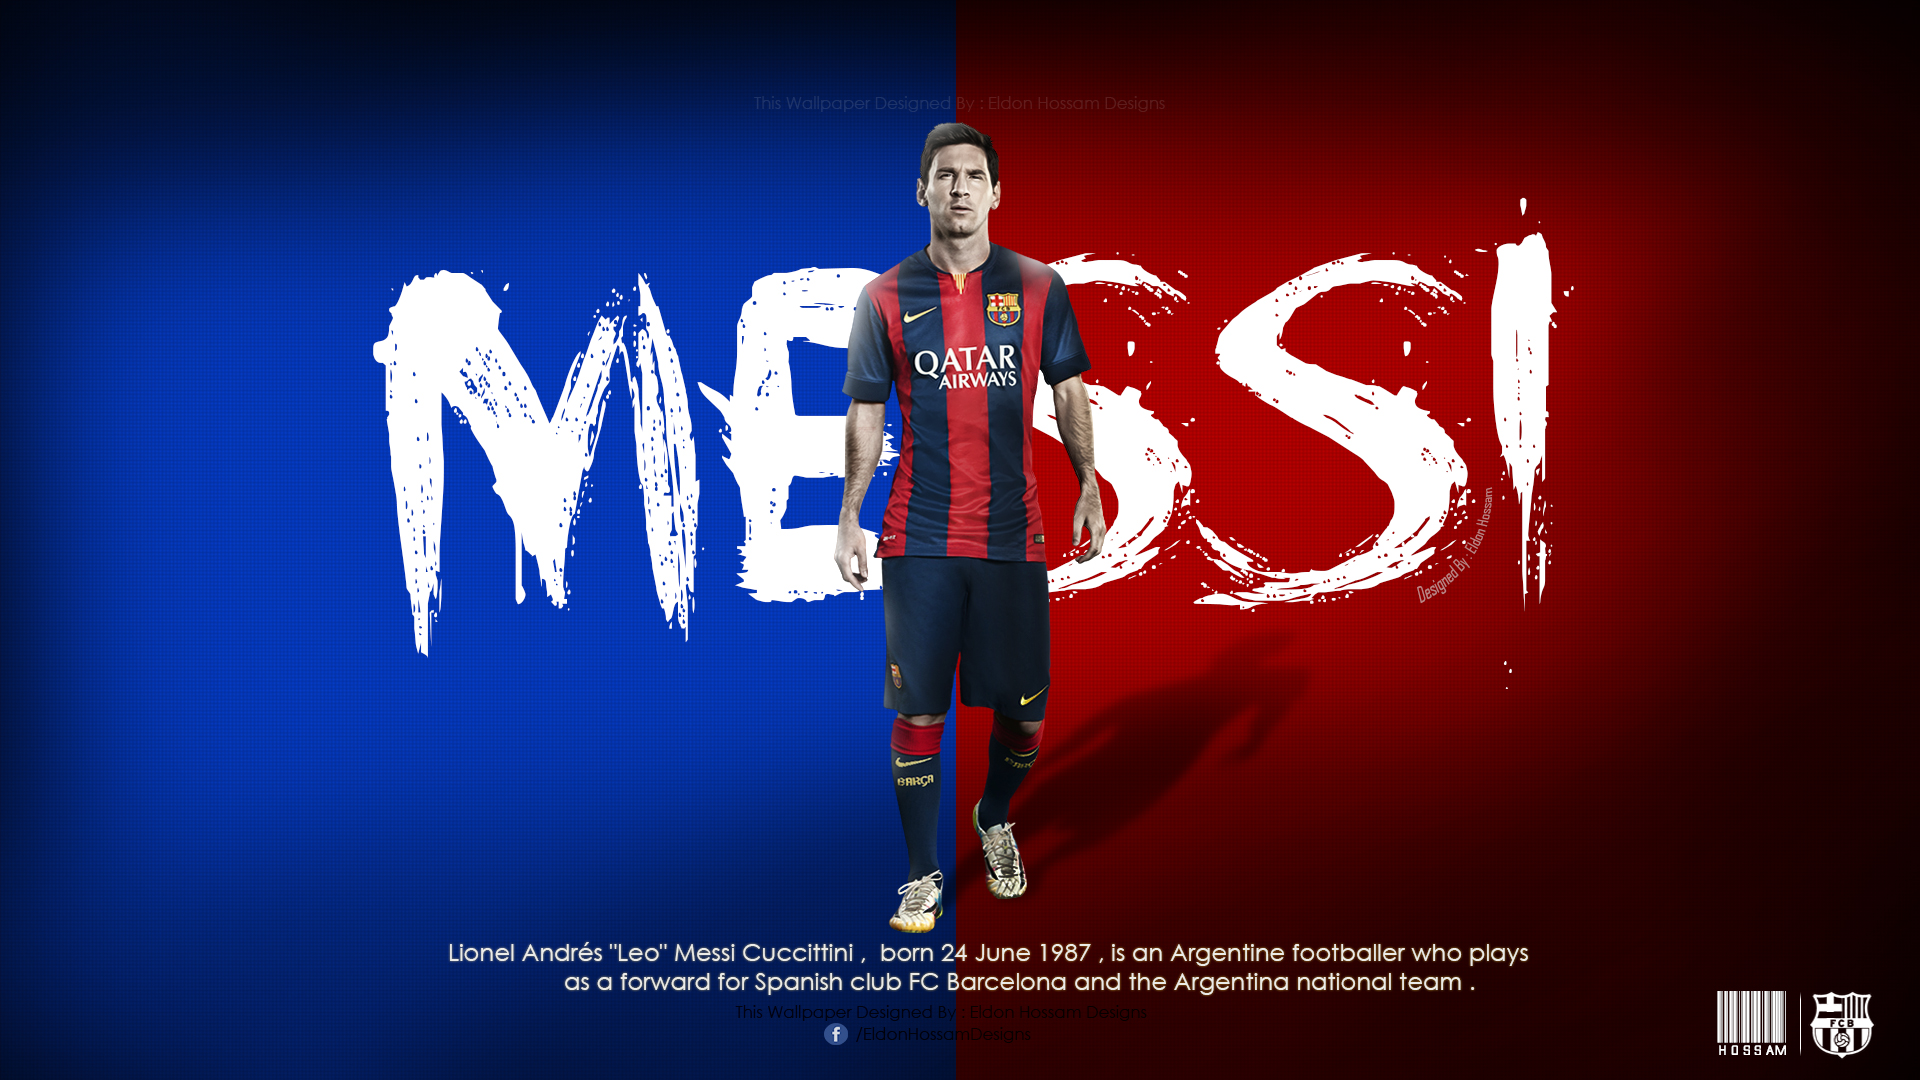 Free Download Lionel Messi 2015 Wallpapers For Iphone Festival Wallpaper 1920x1080 For Your Desktop Mobile Tablet Explore 76 Messi Hd Wallpapers 1080p 2015 Lionel Messi Wallpaper 2015 Wallpaper Of Messi Messi Hd Wallpapers 2015